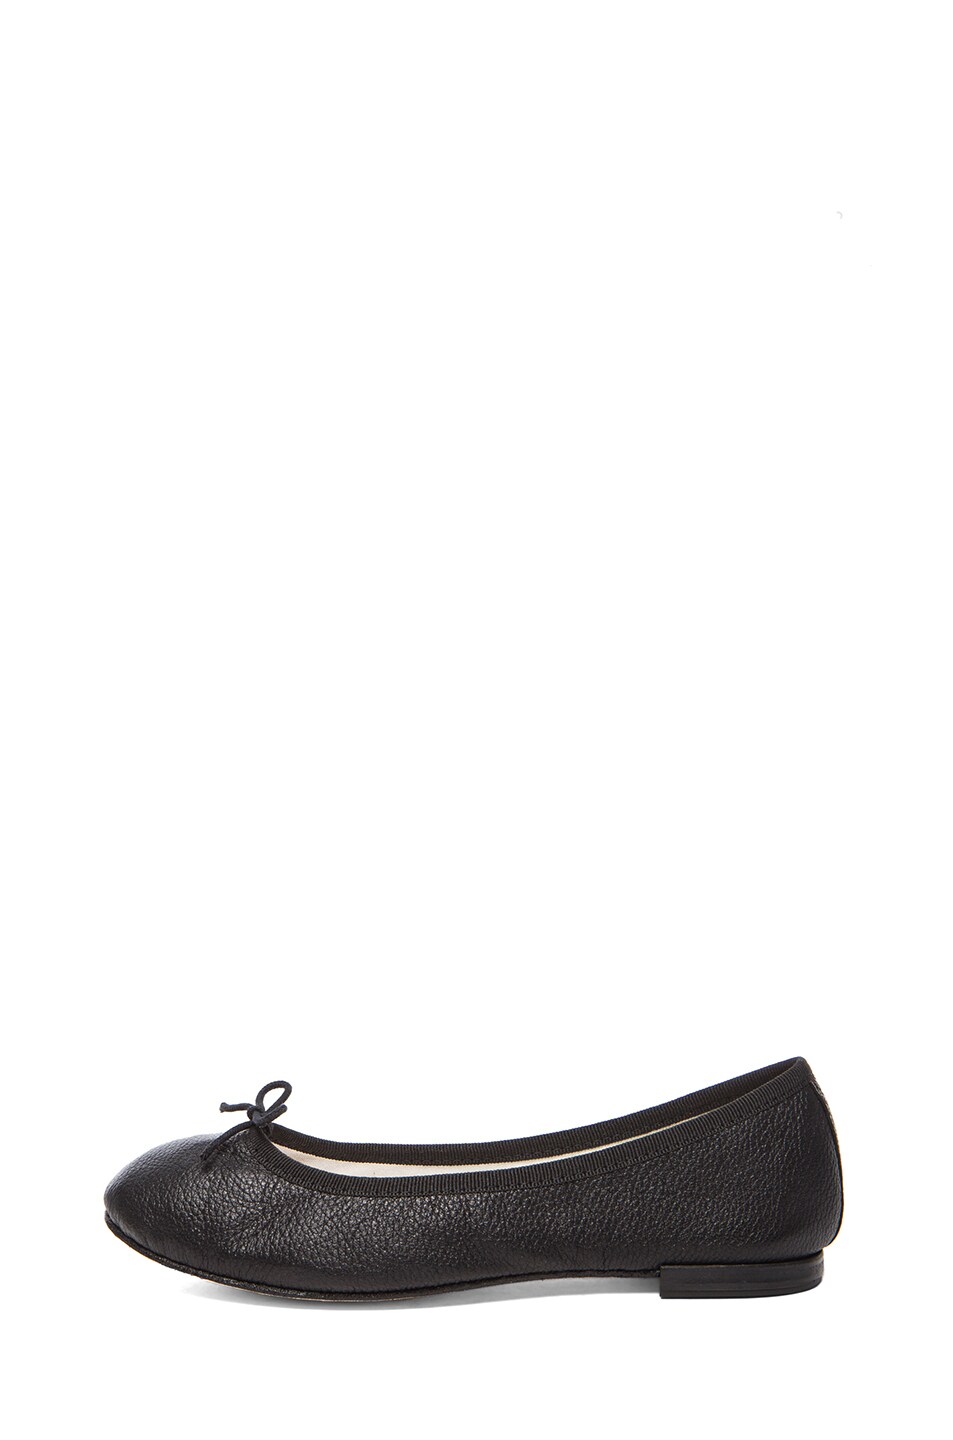 Image 1 of Repetto Goatskin Leather Flats in Black